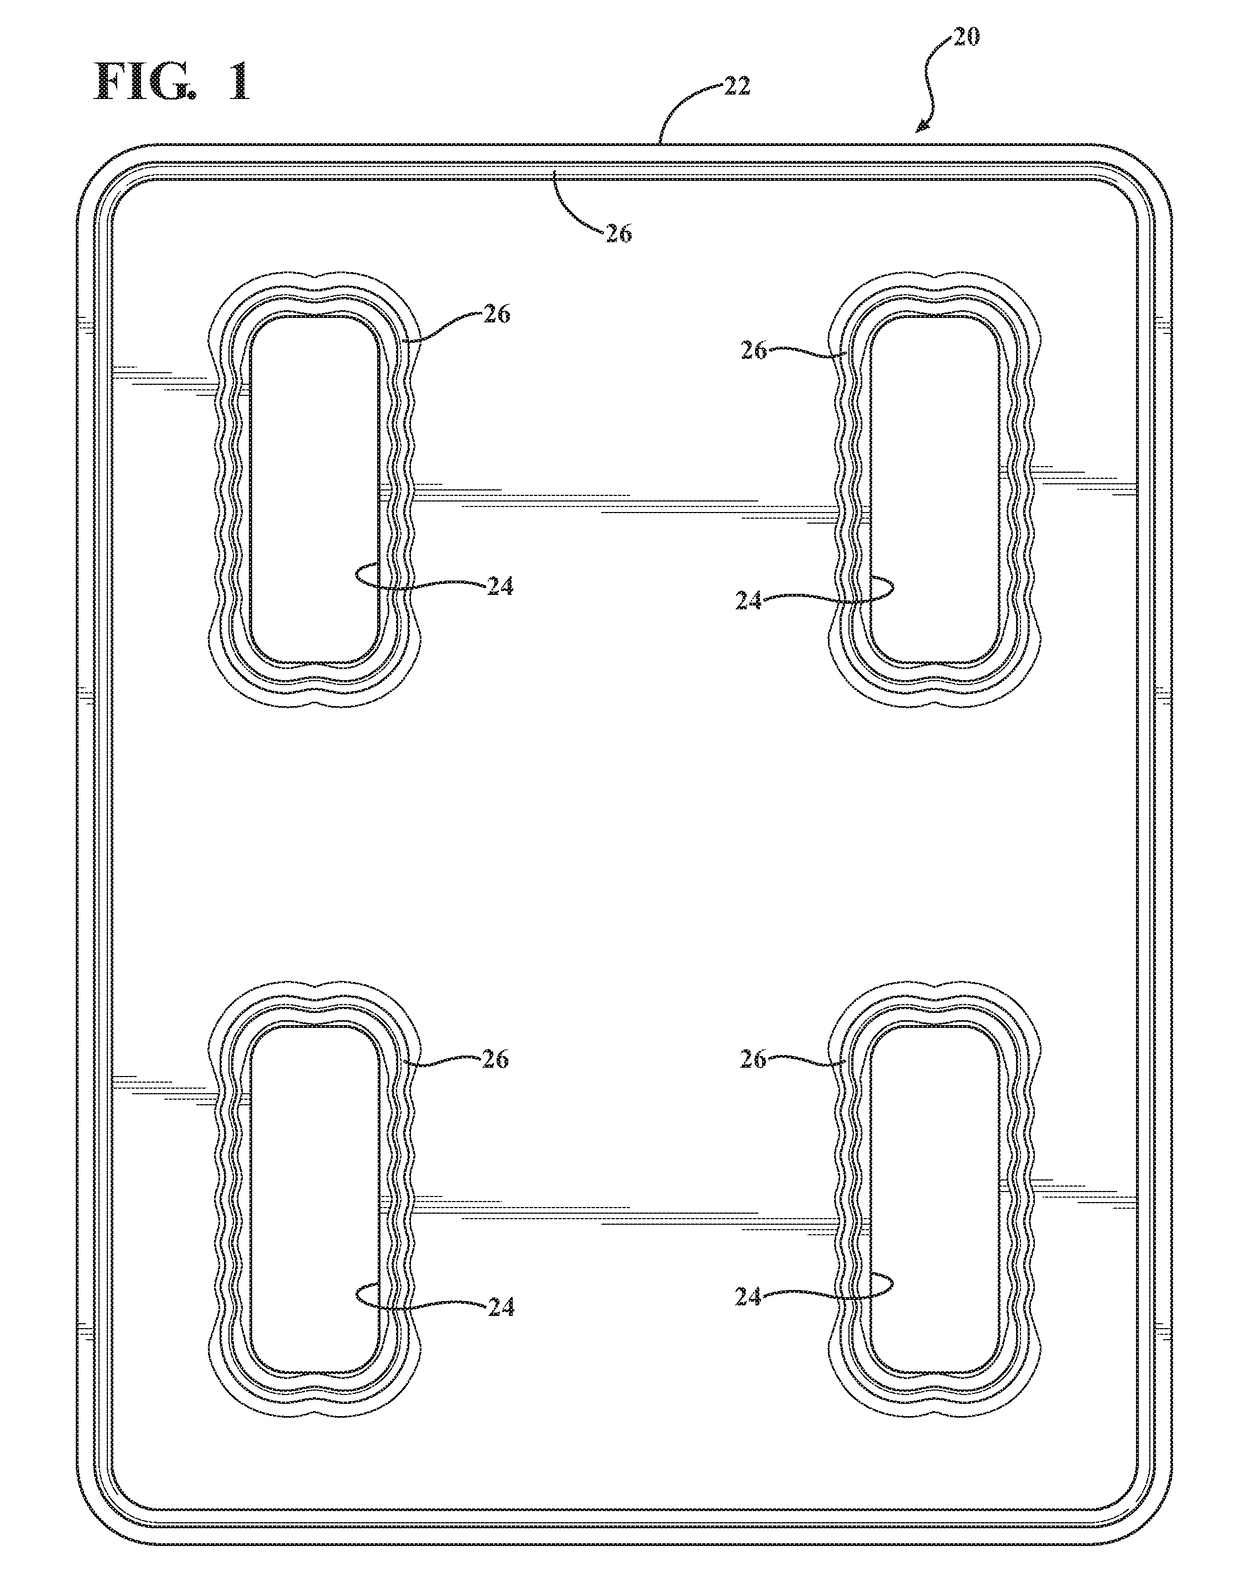 Bipolar plate for a fuel cell, and a method manufacturing the same